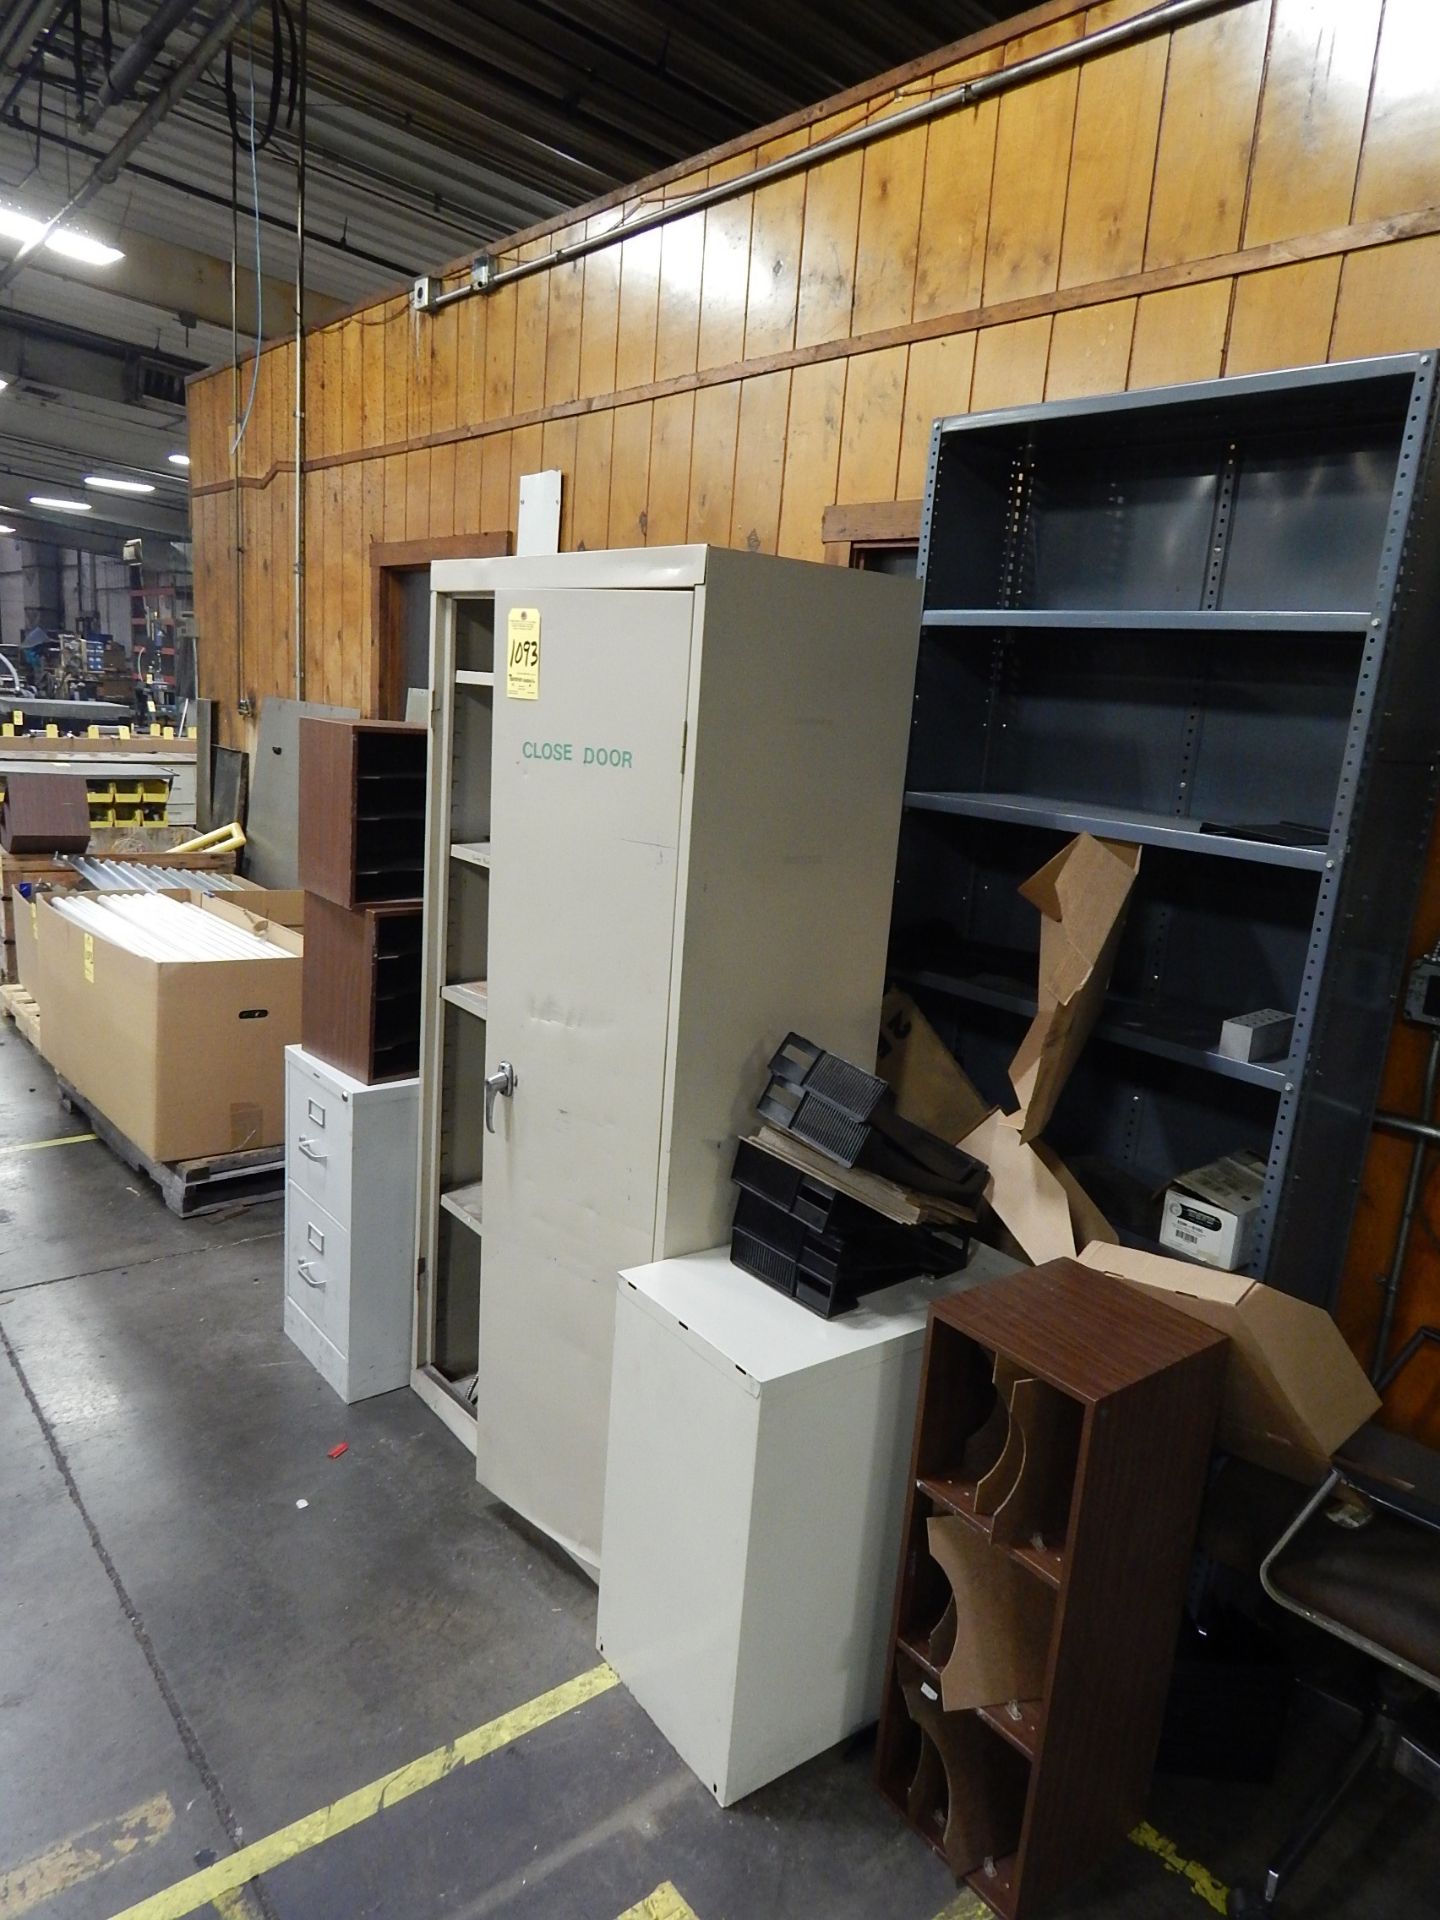 (2) Metal Cabinets and Electrical Items